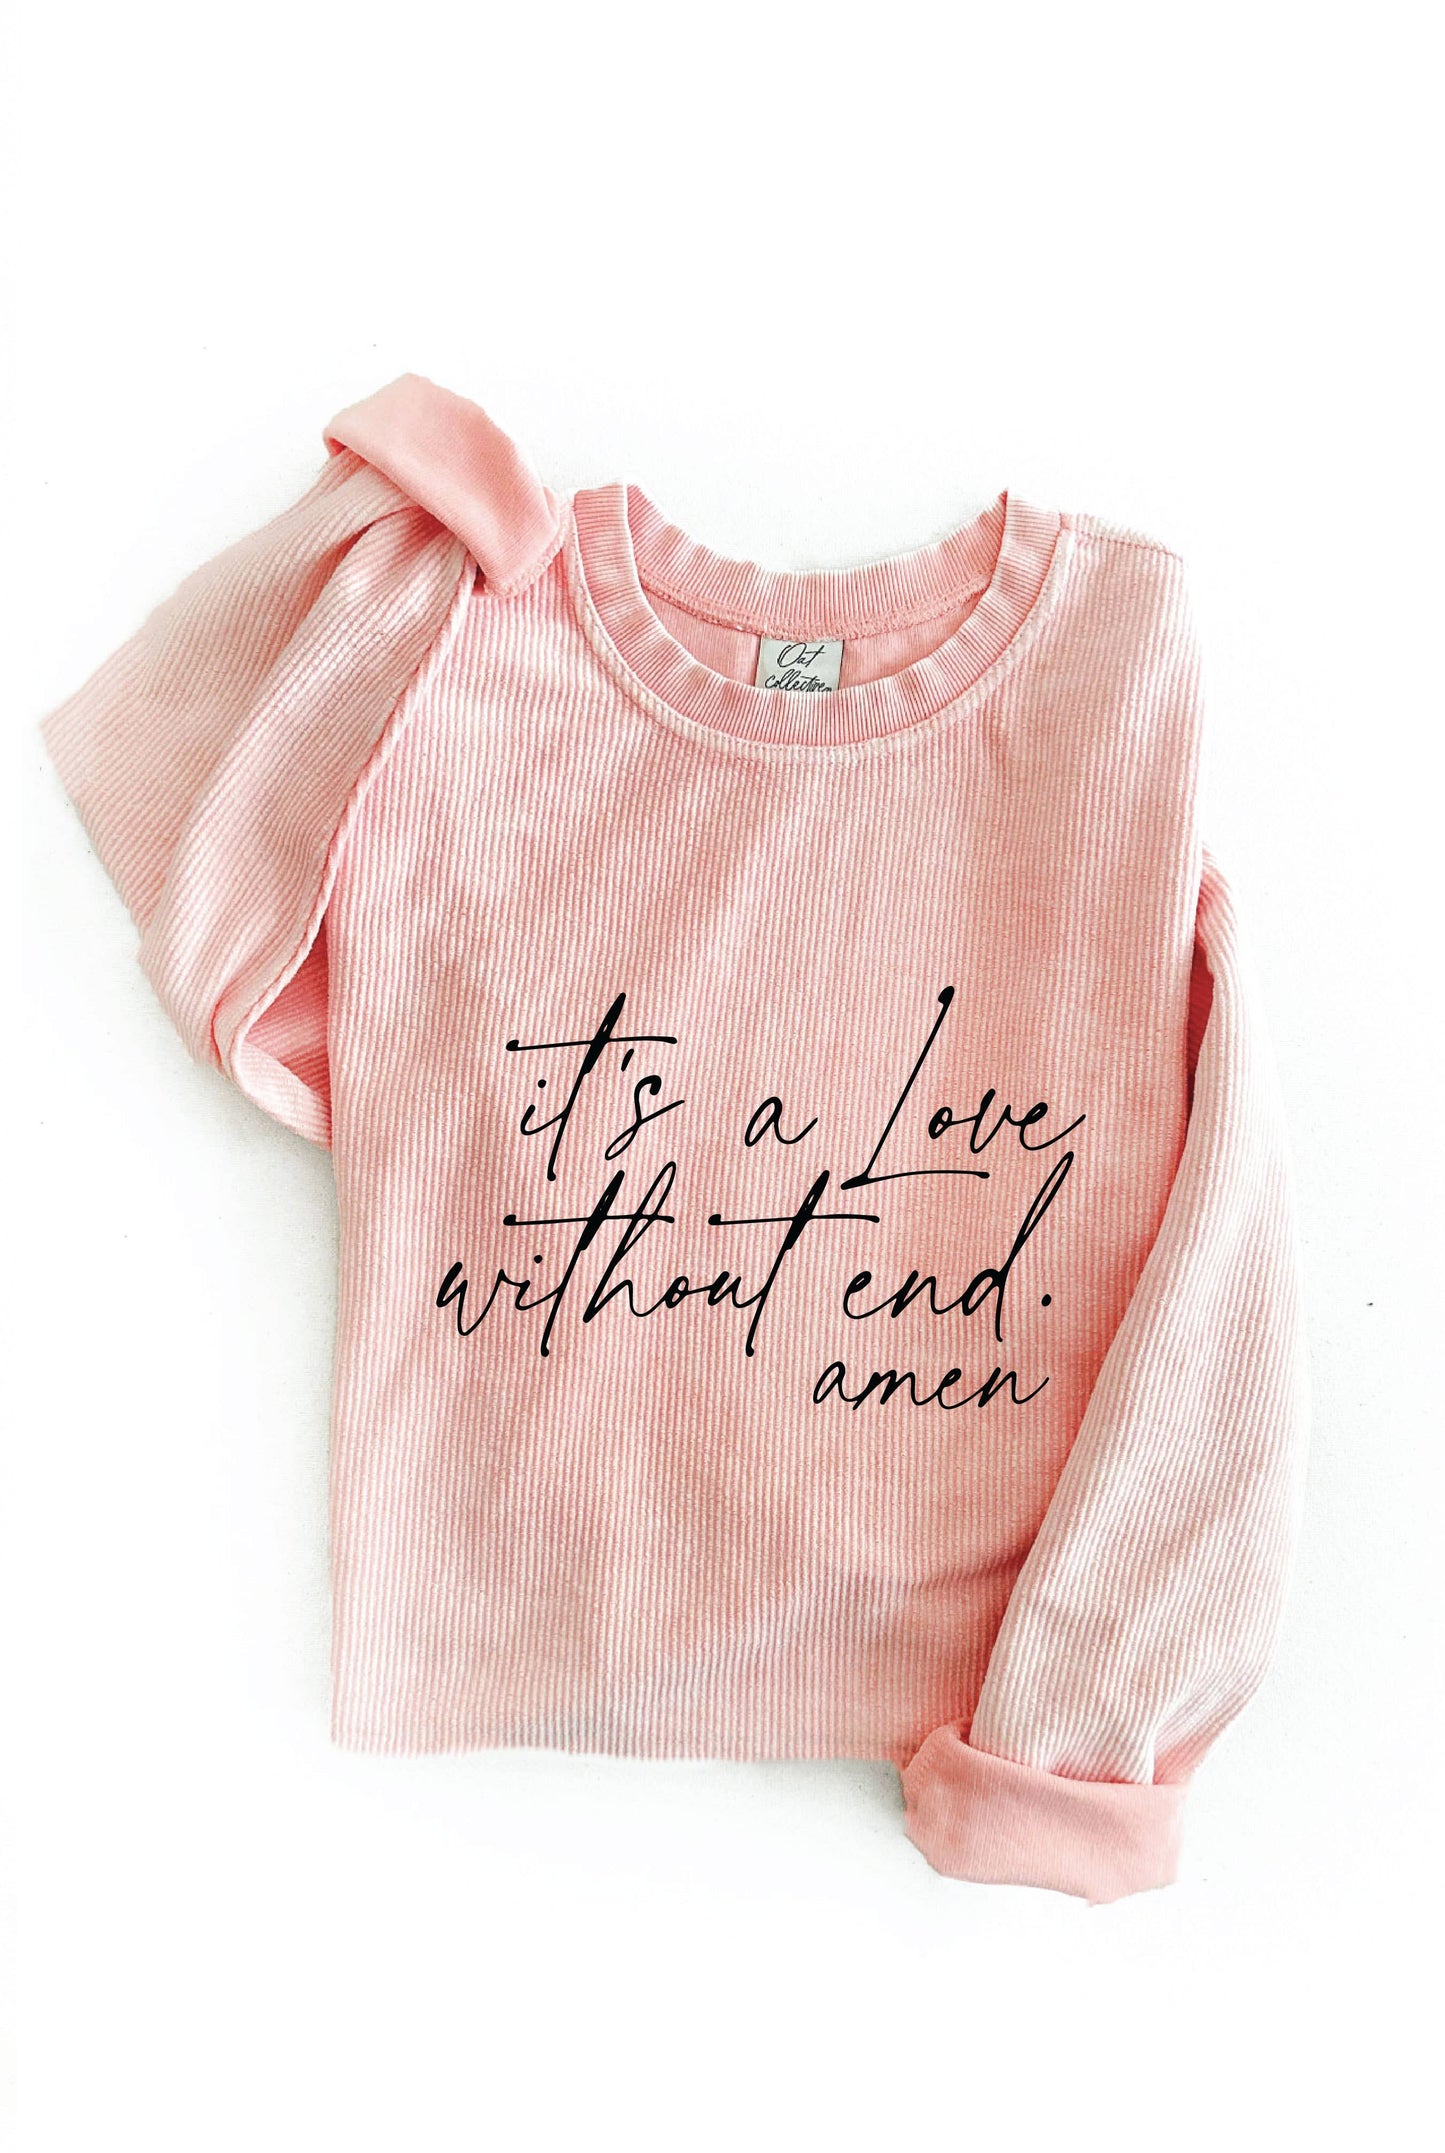 IT'S A LOVE WITHOUT END. AMEN Thermal Vintage Pullover: S / VINTAGE CHARCOAL